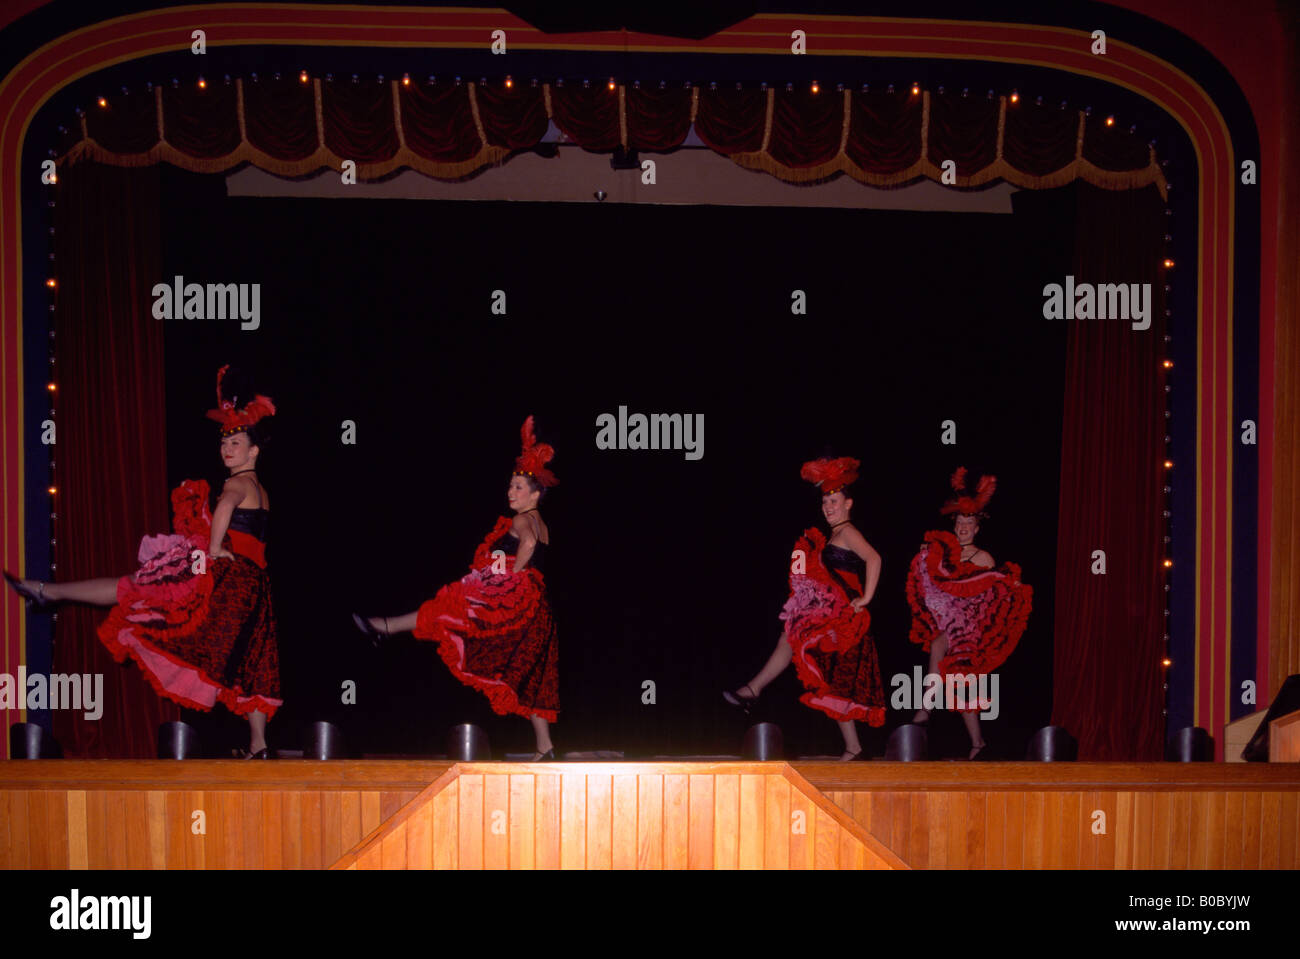 https://c8.alamy.com/comp/B0BYJW/can-can-cancan-girls-dancing-at-diamond-tooth-gerties-gambling-hall-B0BYJW.jpg